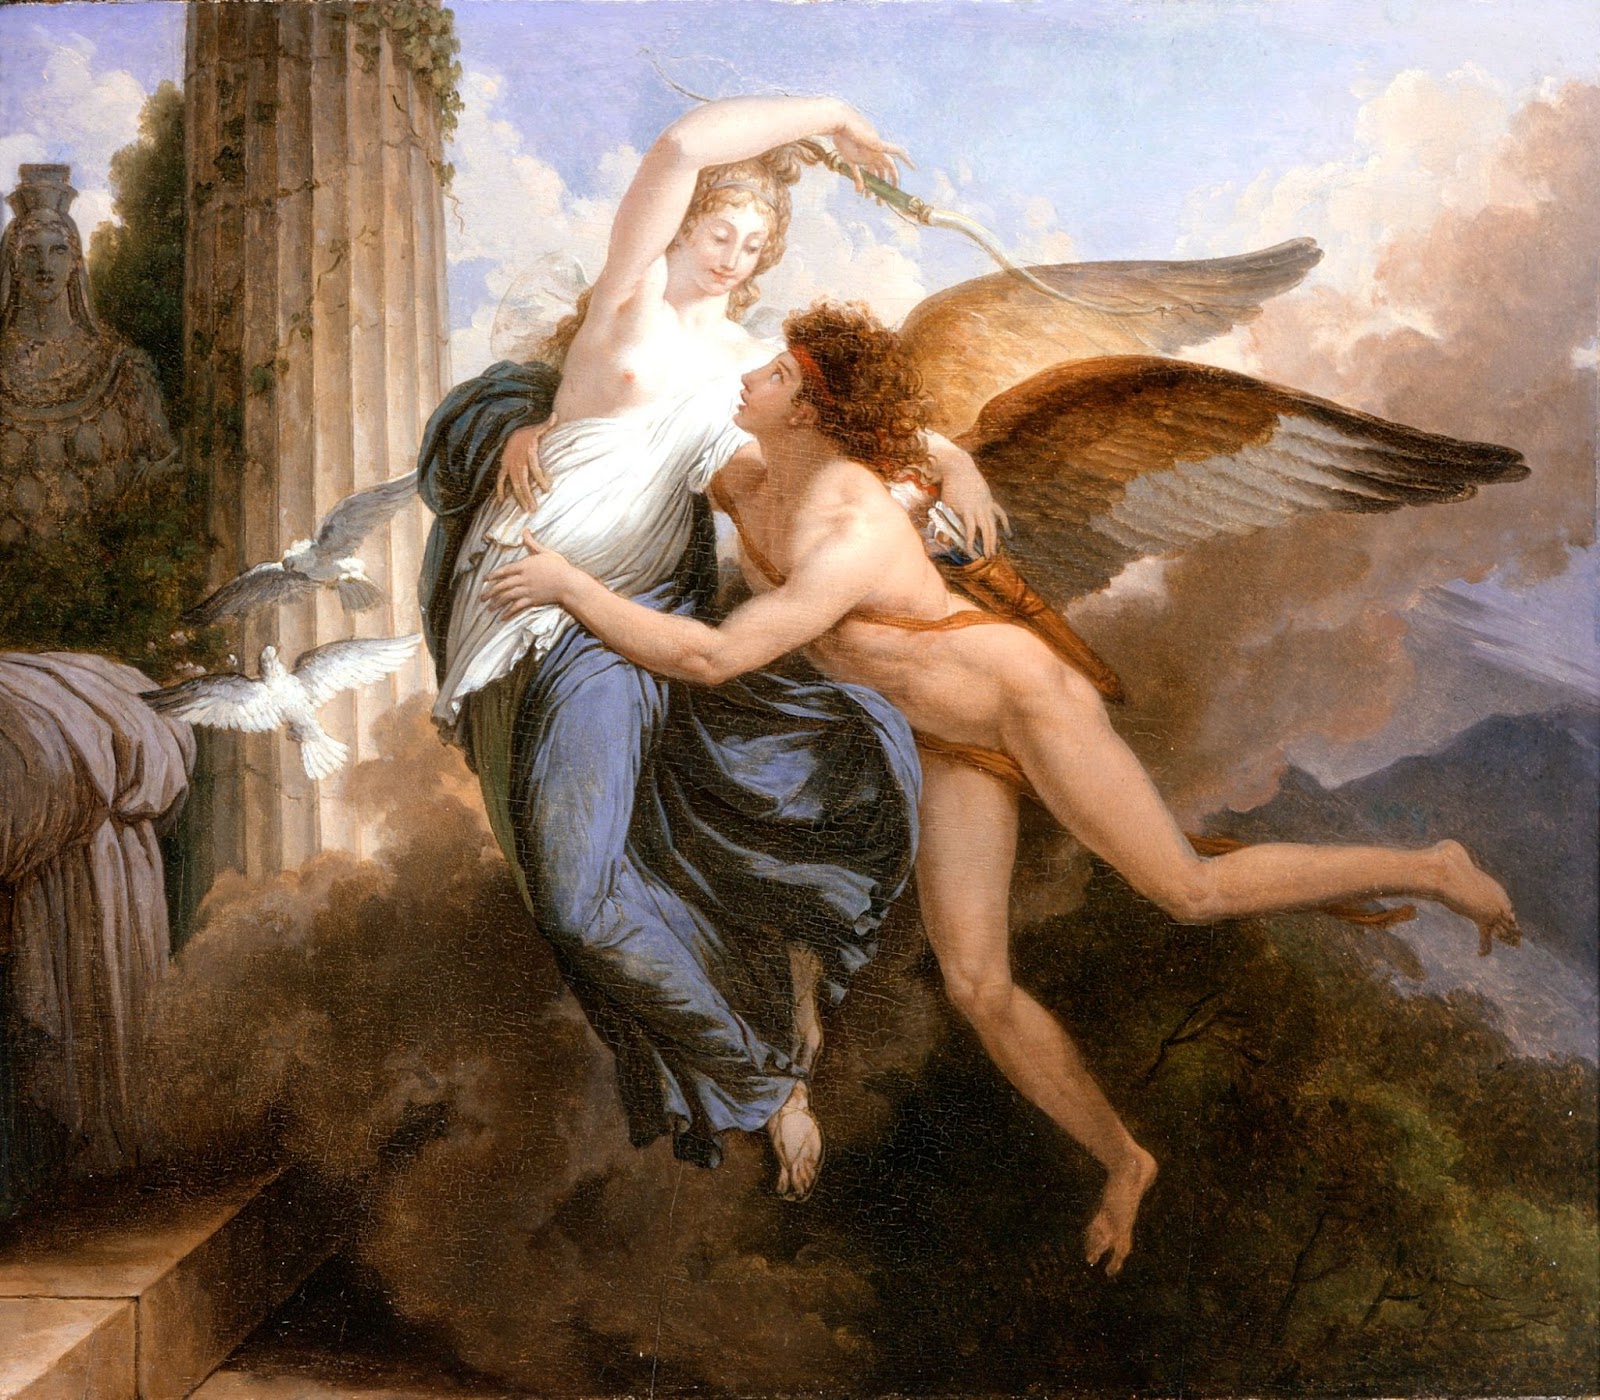 The reunion of Cupid and Psyche. Mythical love stories: Jean-Pierre Saint-Ours, The Reunion of Cupid and Psyche, 1789-92, LACMA, Los Angeles, CA, USA.